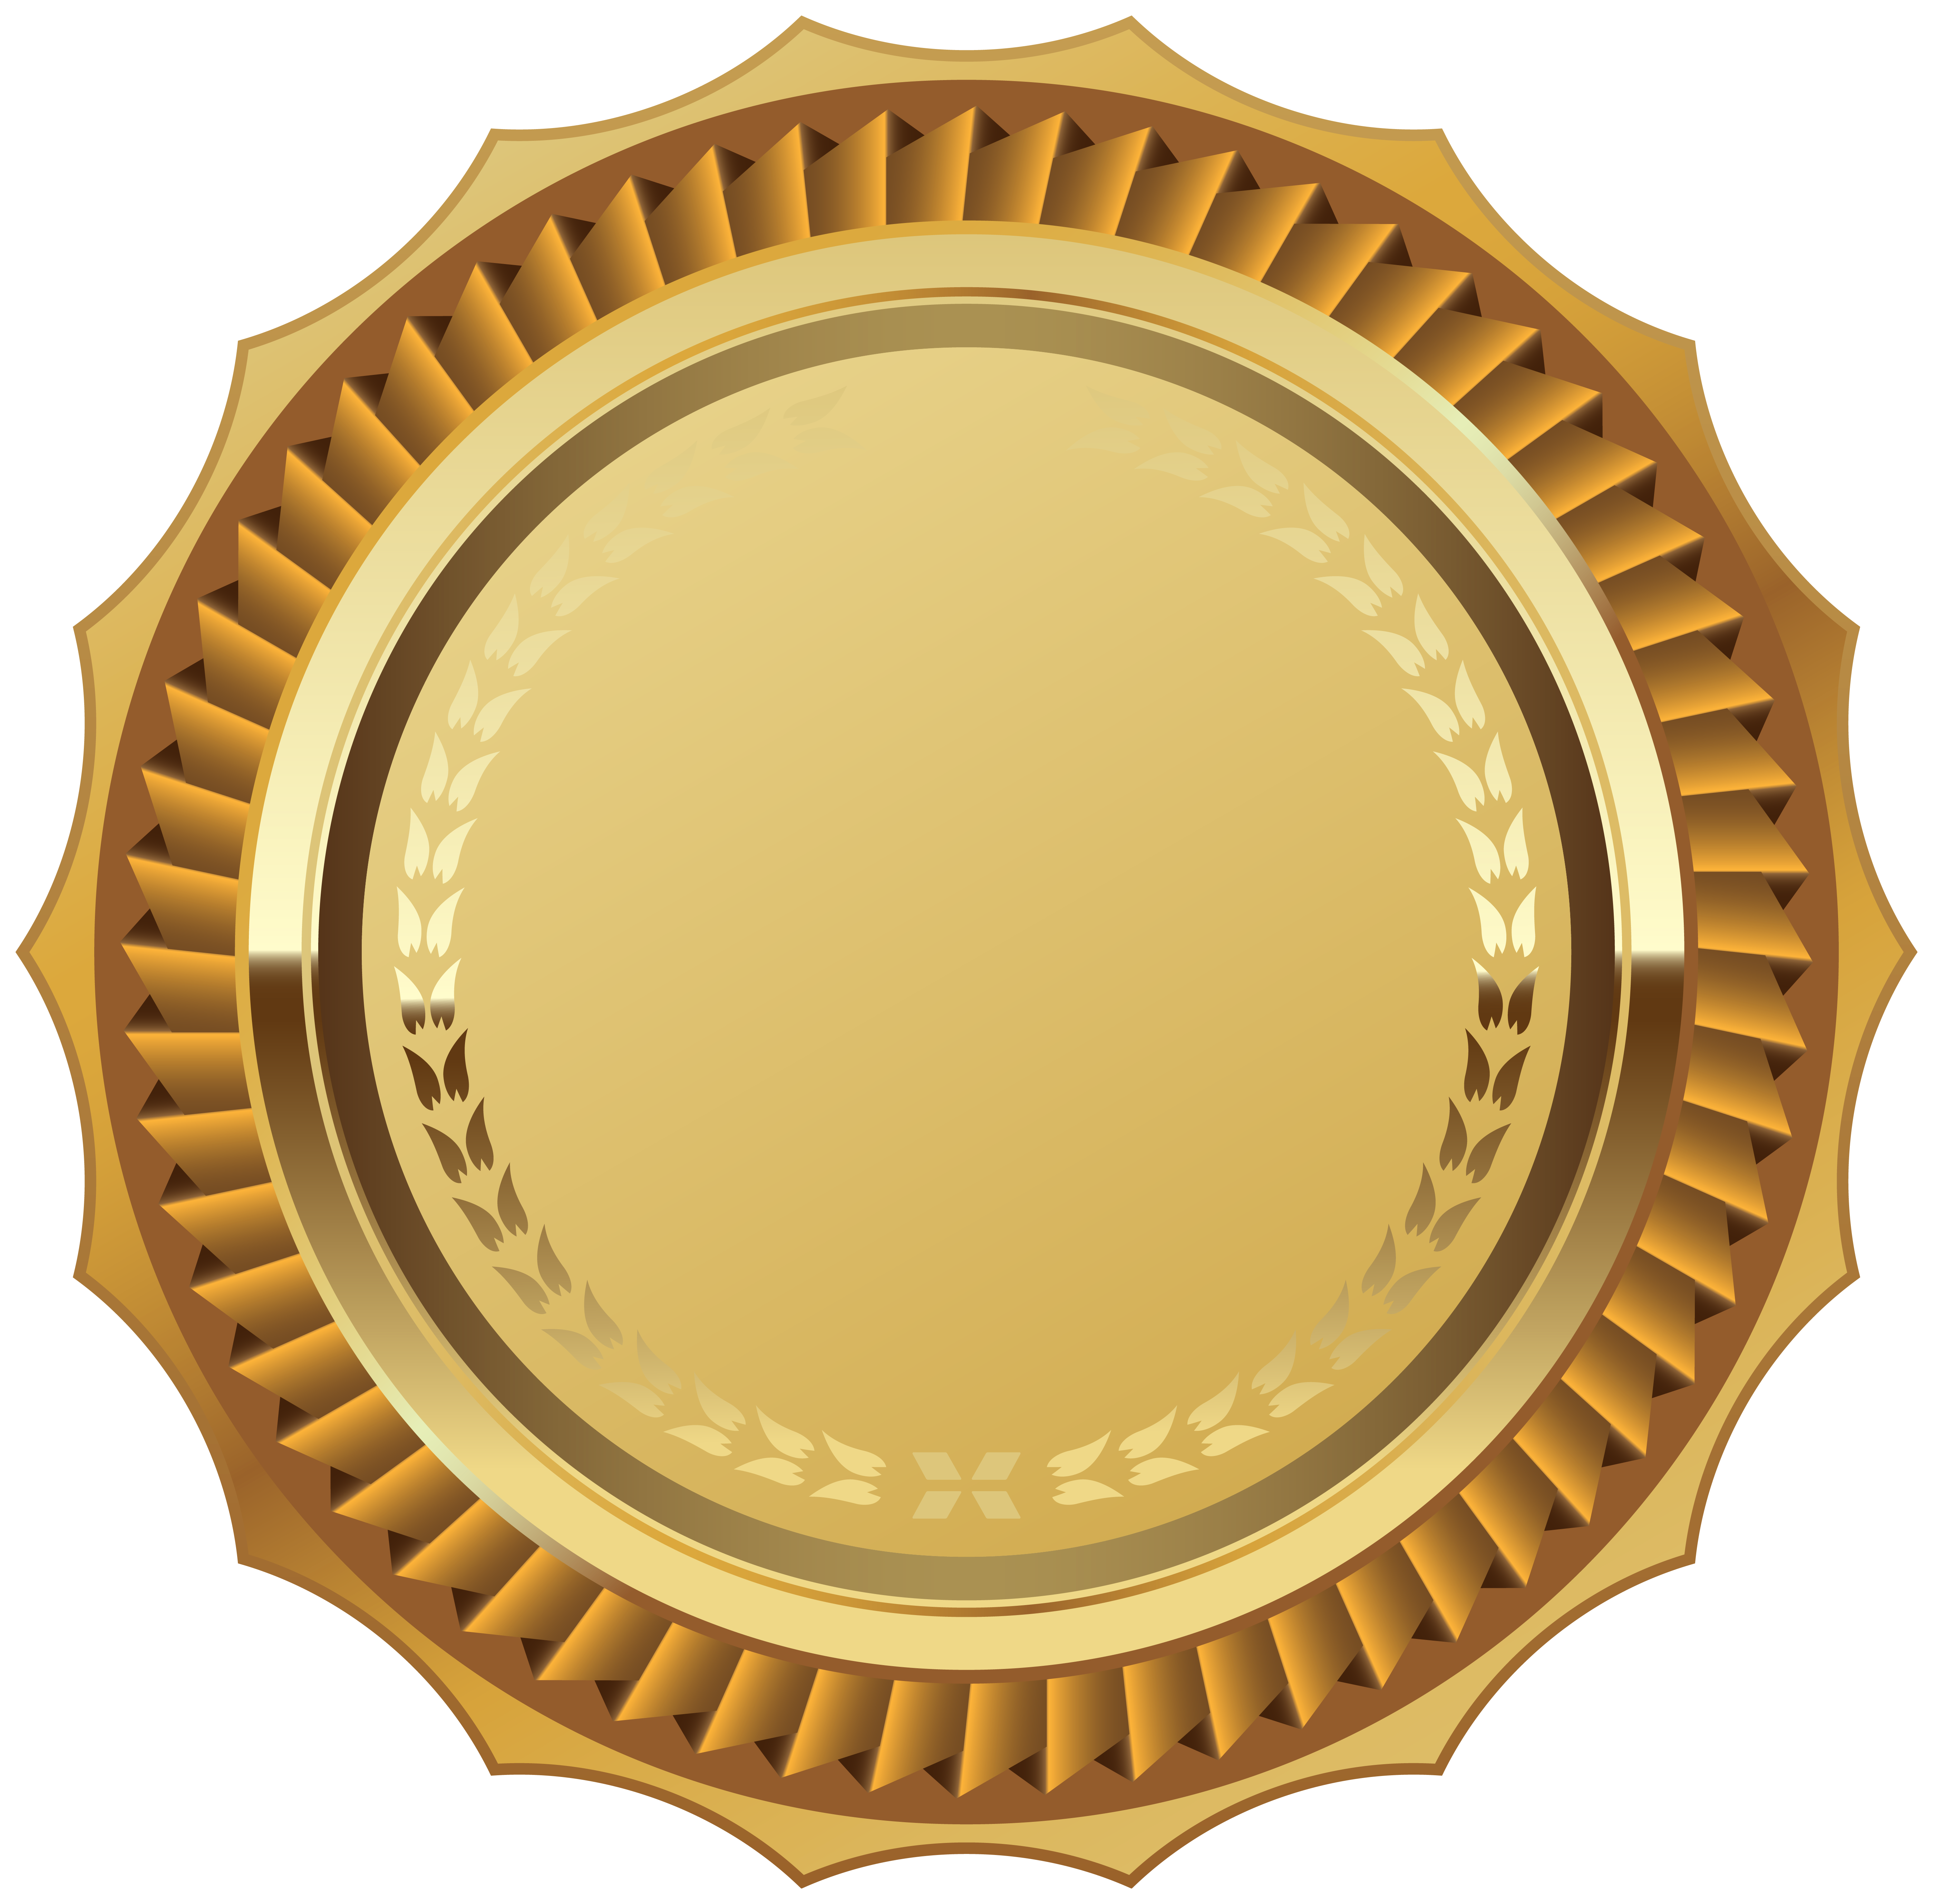 Gold Seal with Ribbon PNG Clipart Image | Gallery Yopriceville - High ...